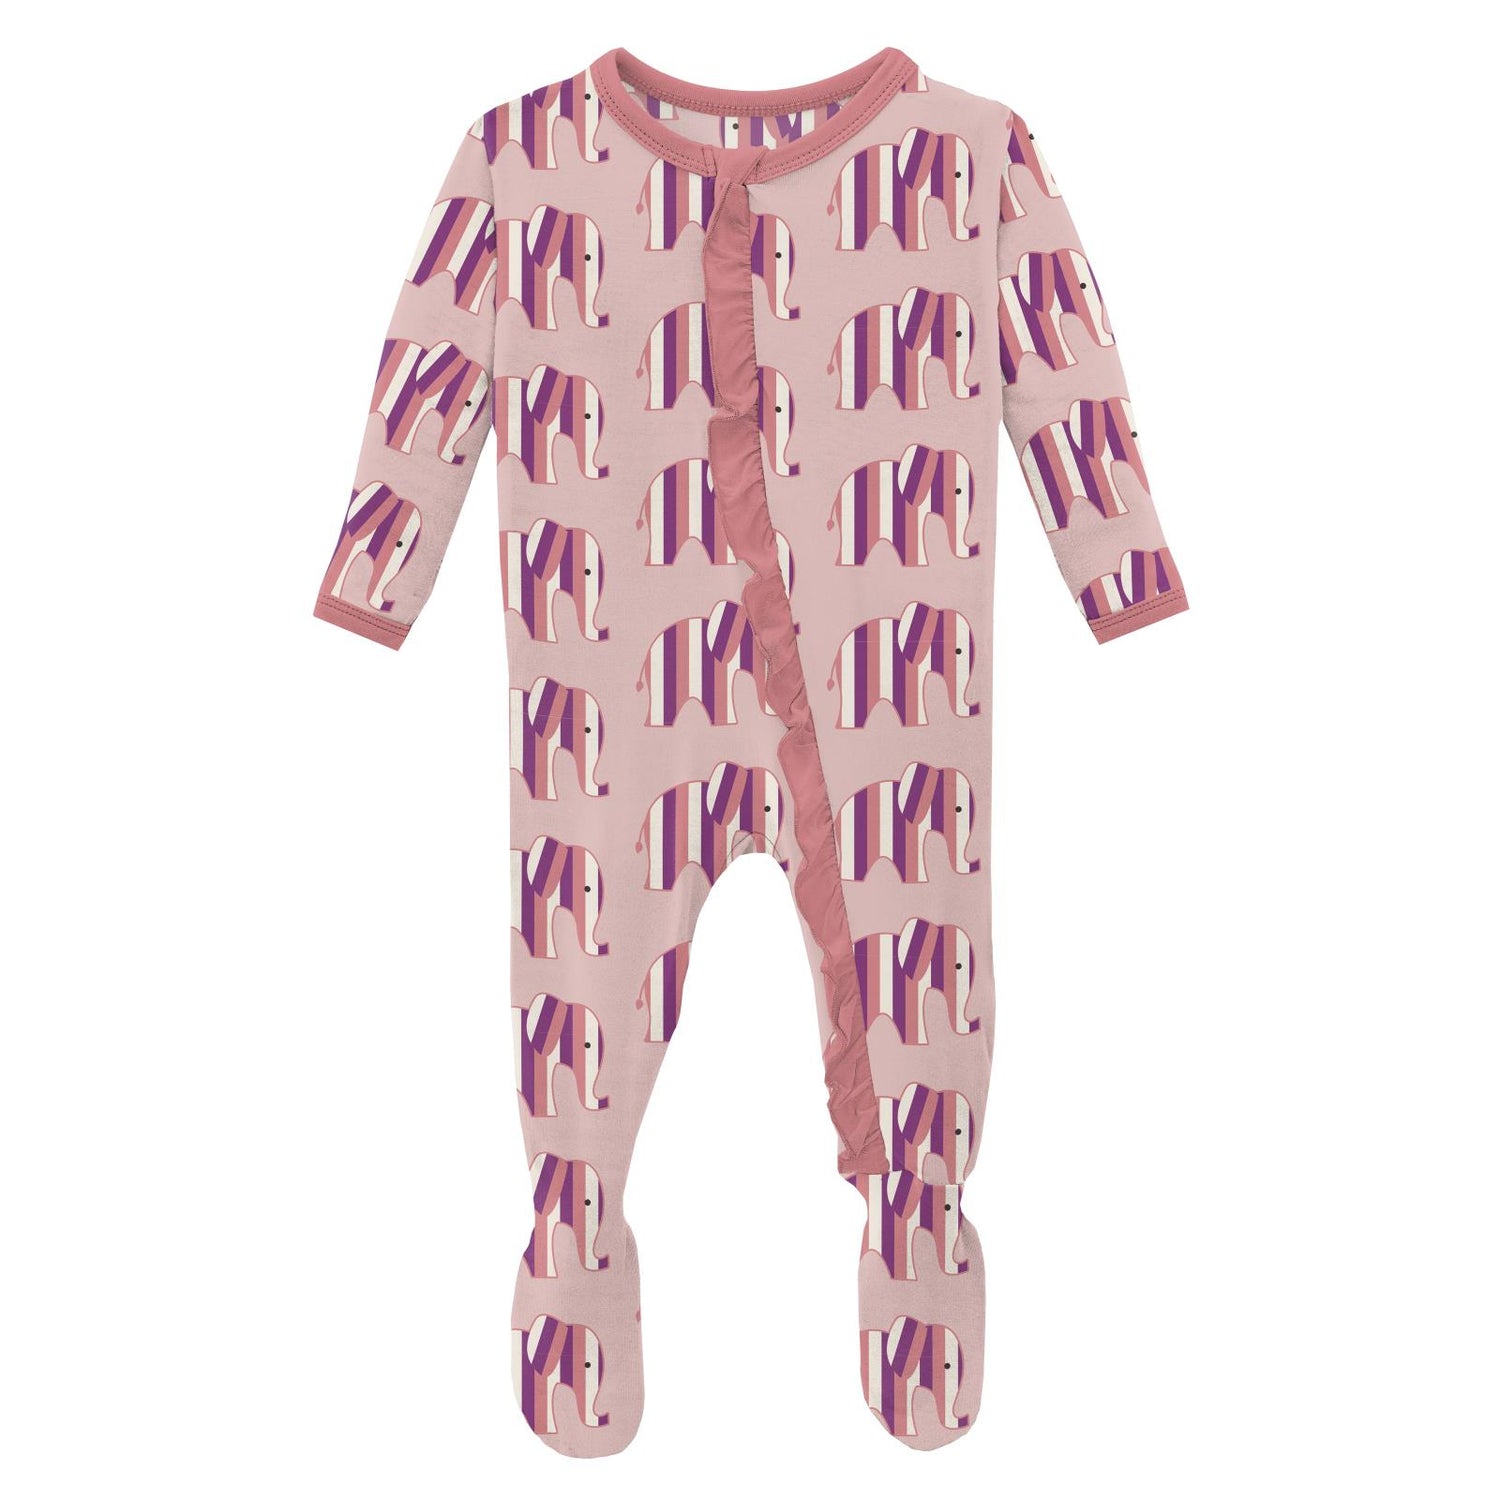 Print Classic Ruffle Footie with Zipper in Baby Rose Elephant Stripe